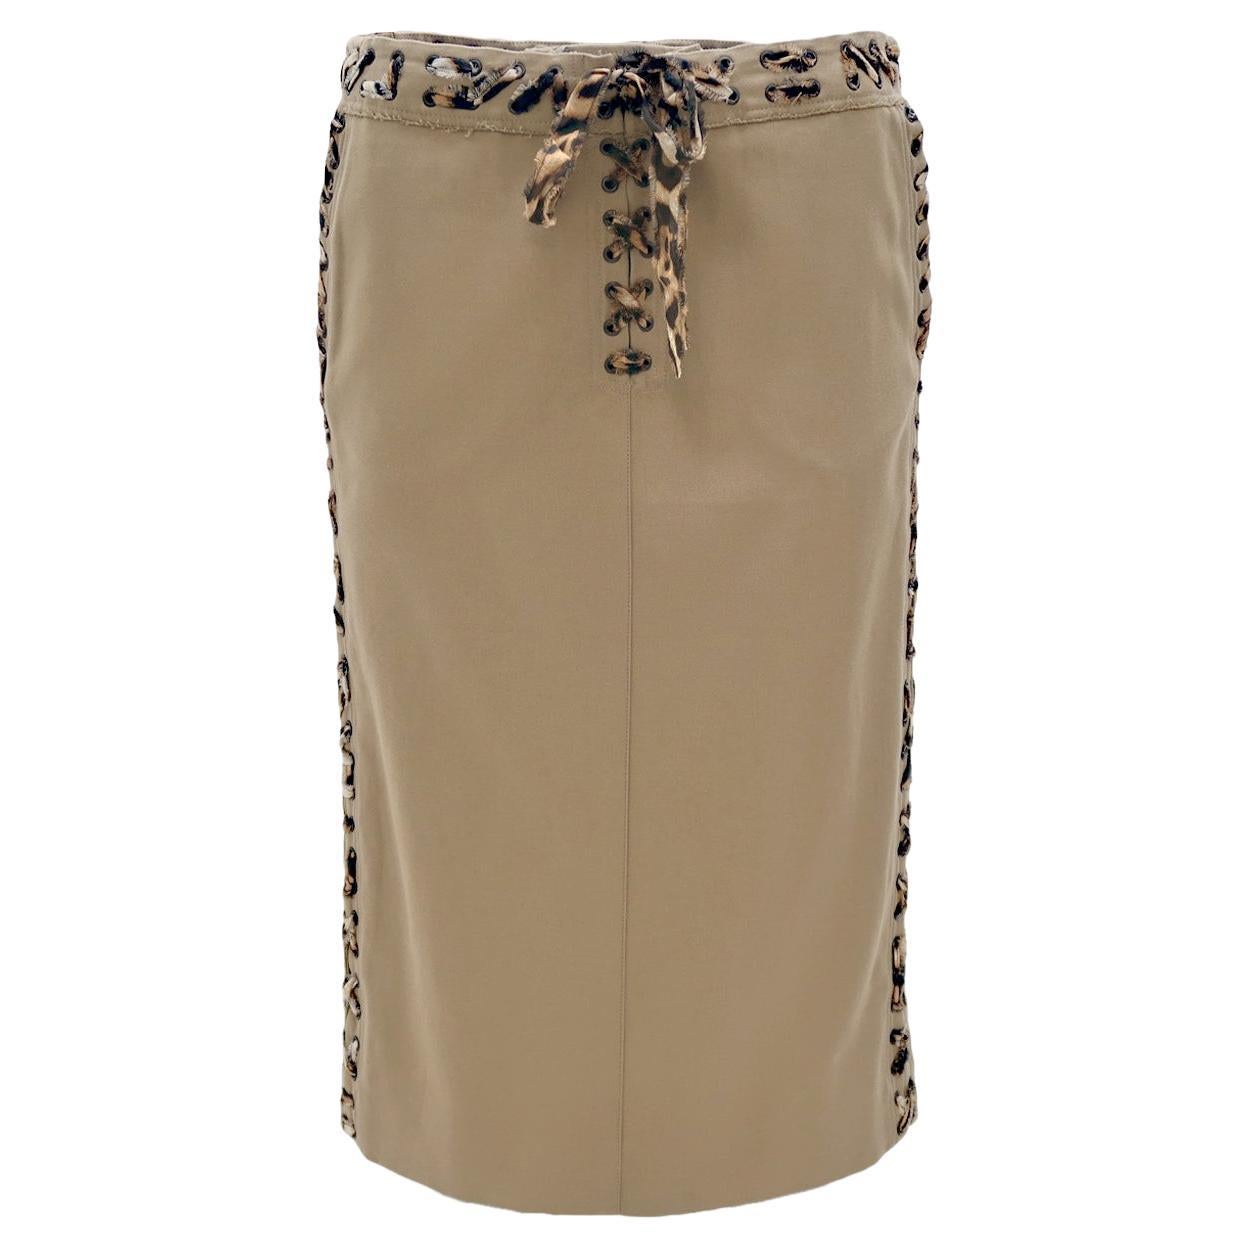 Yves Saint Laurent by Tom Ford SS-02 Cotton Laced Safari Skirt with Leopard Trim